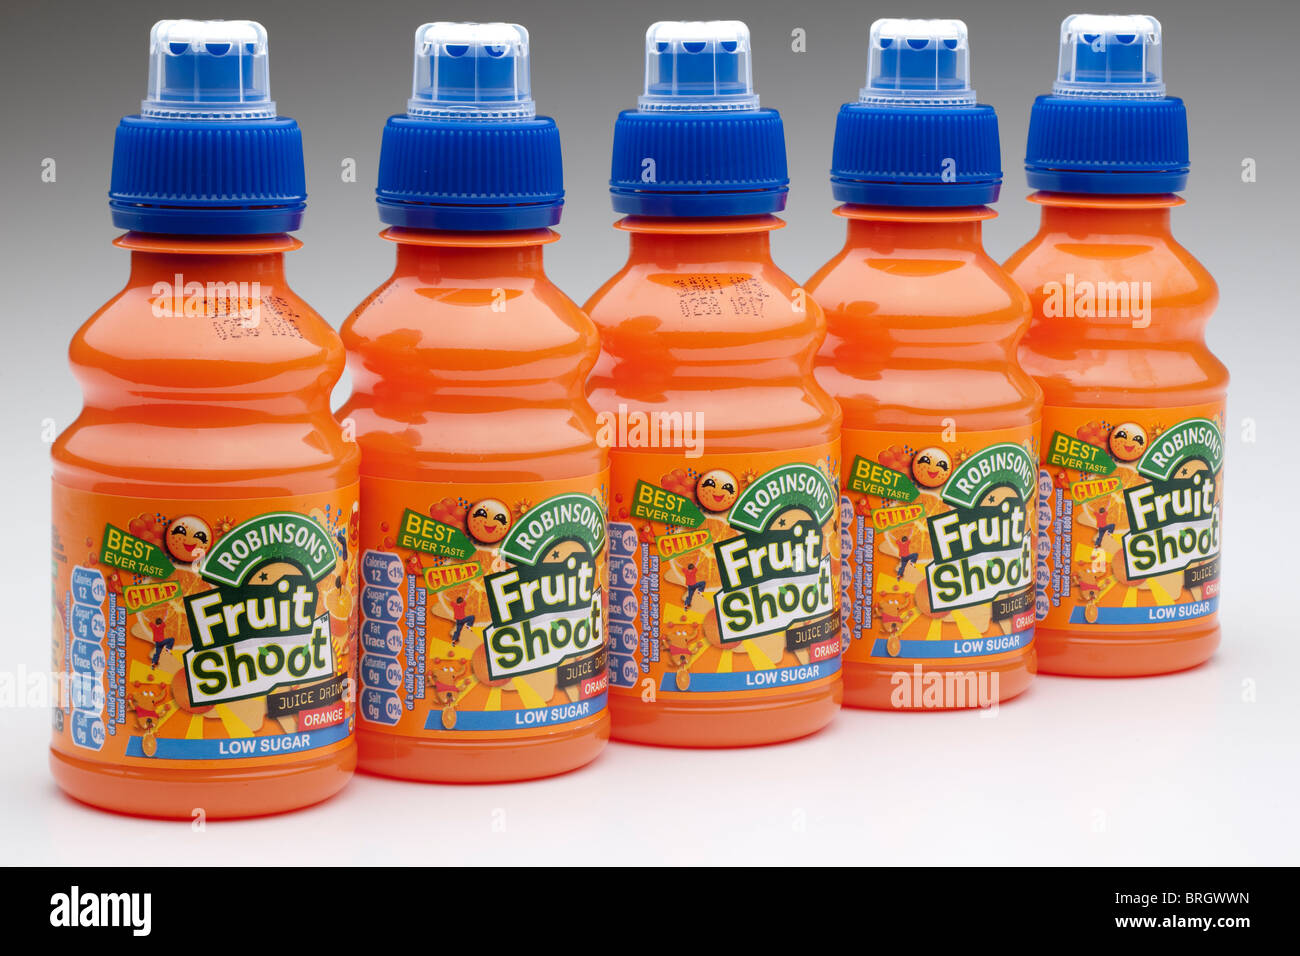 Five plastic bottles of Robinson's Fruit Shoot orange juice drink made from concentrate Stock Photo